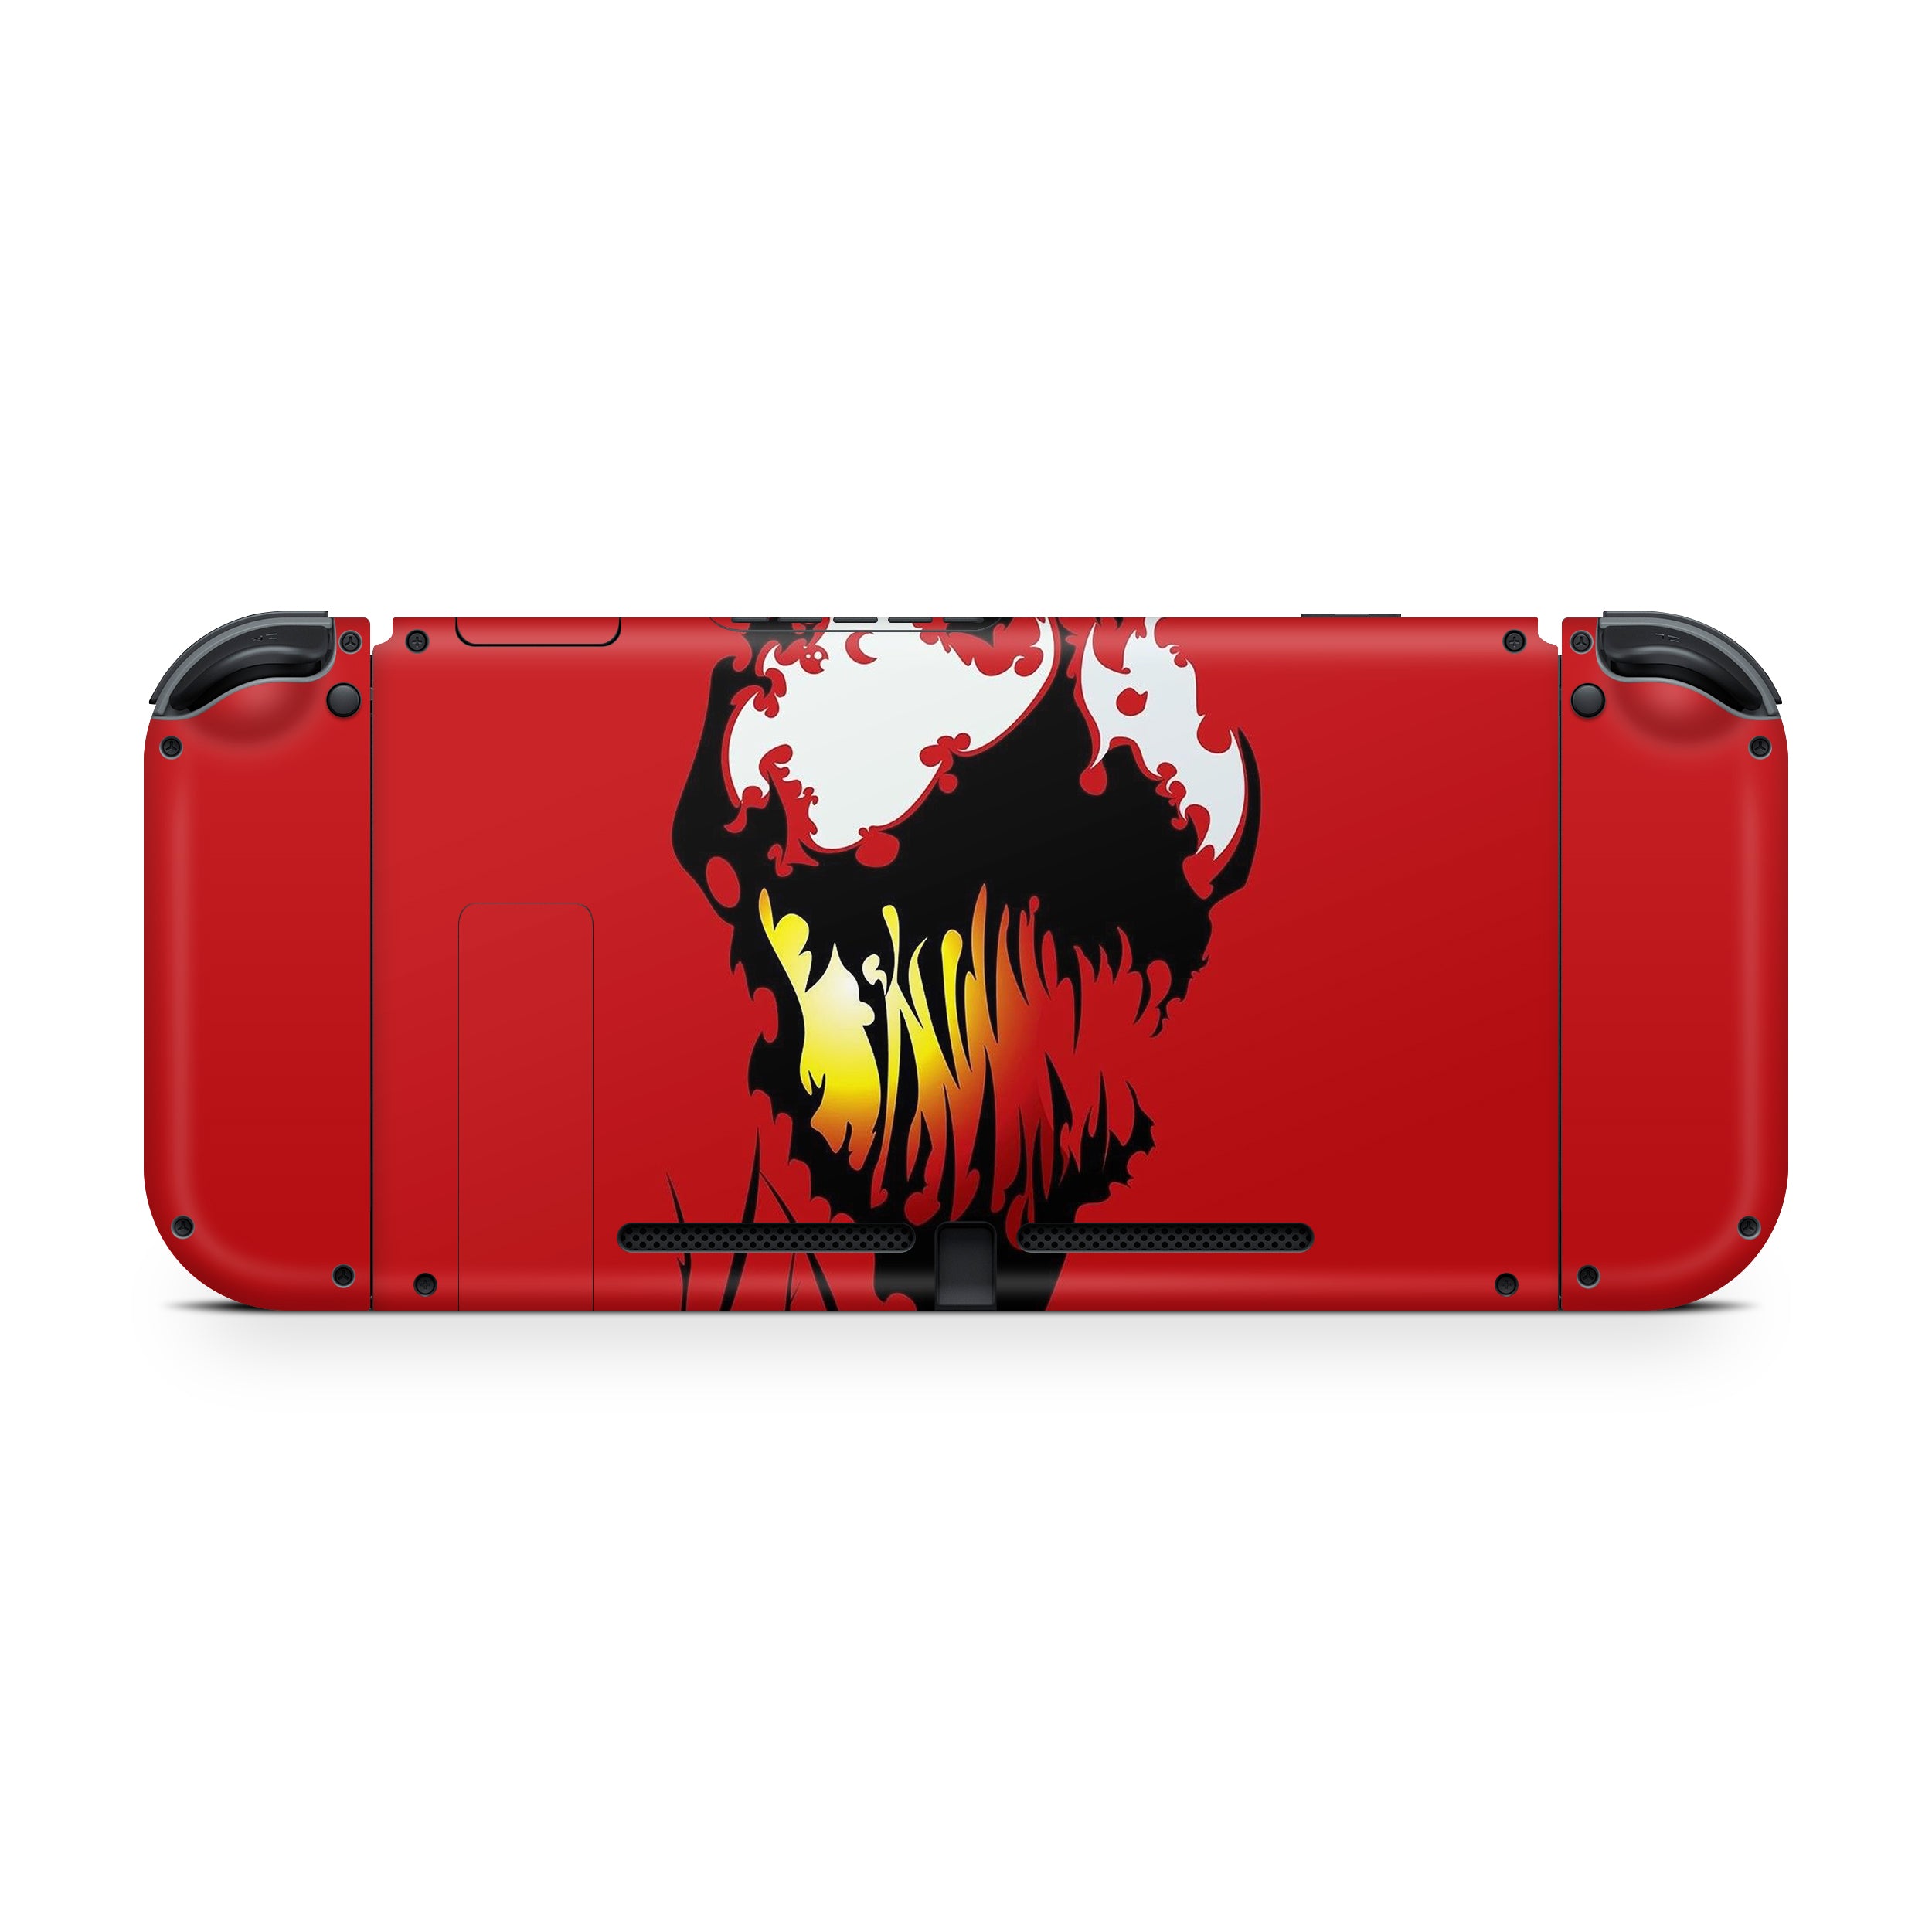 A video game skin featuring a Marvel Carnage design for the Nintendo Switch.